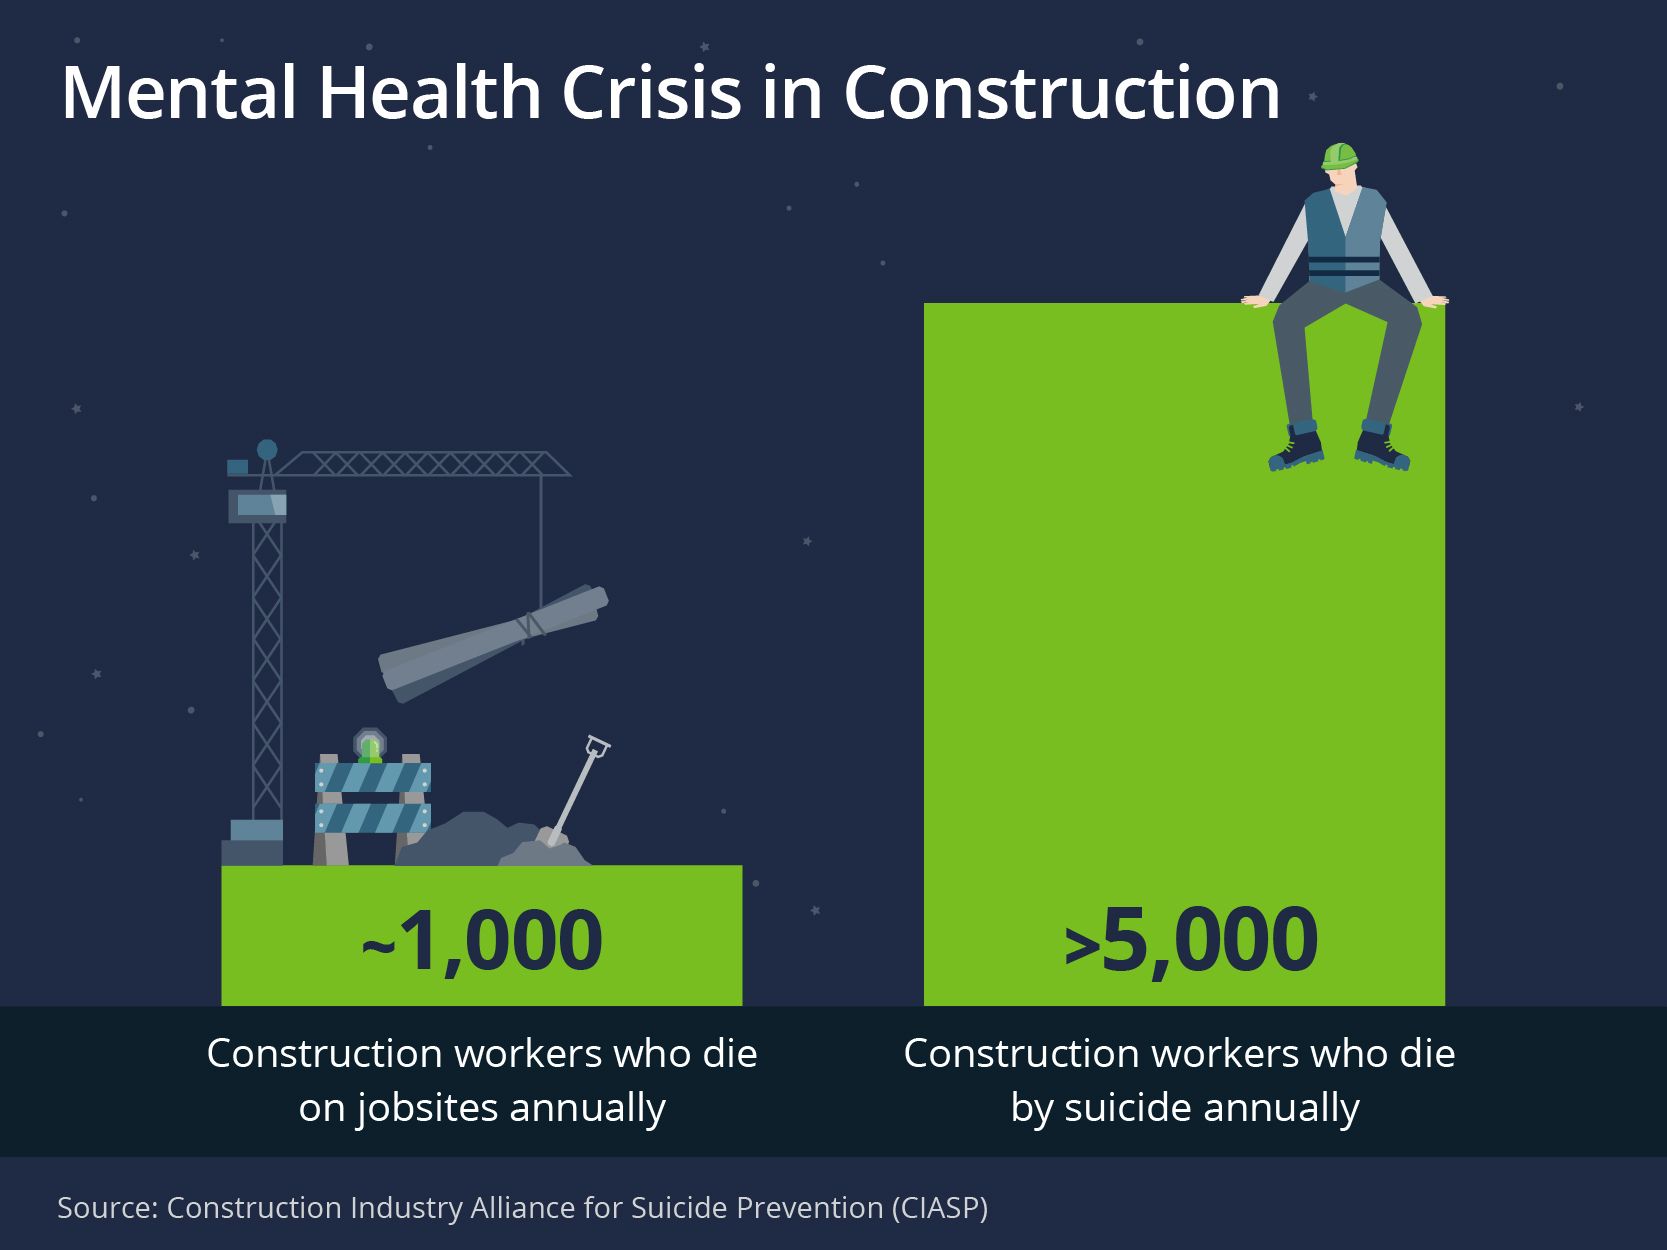 About 1000 workers die on jobsites annually, About 5000 construction workers die by suicide annually